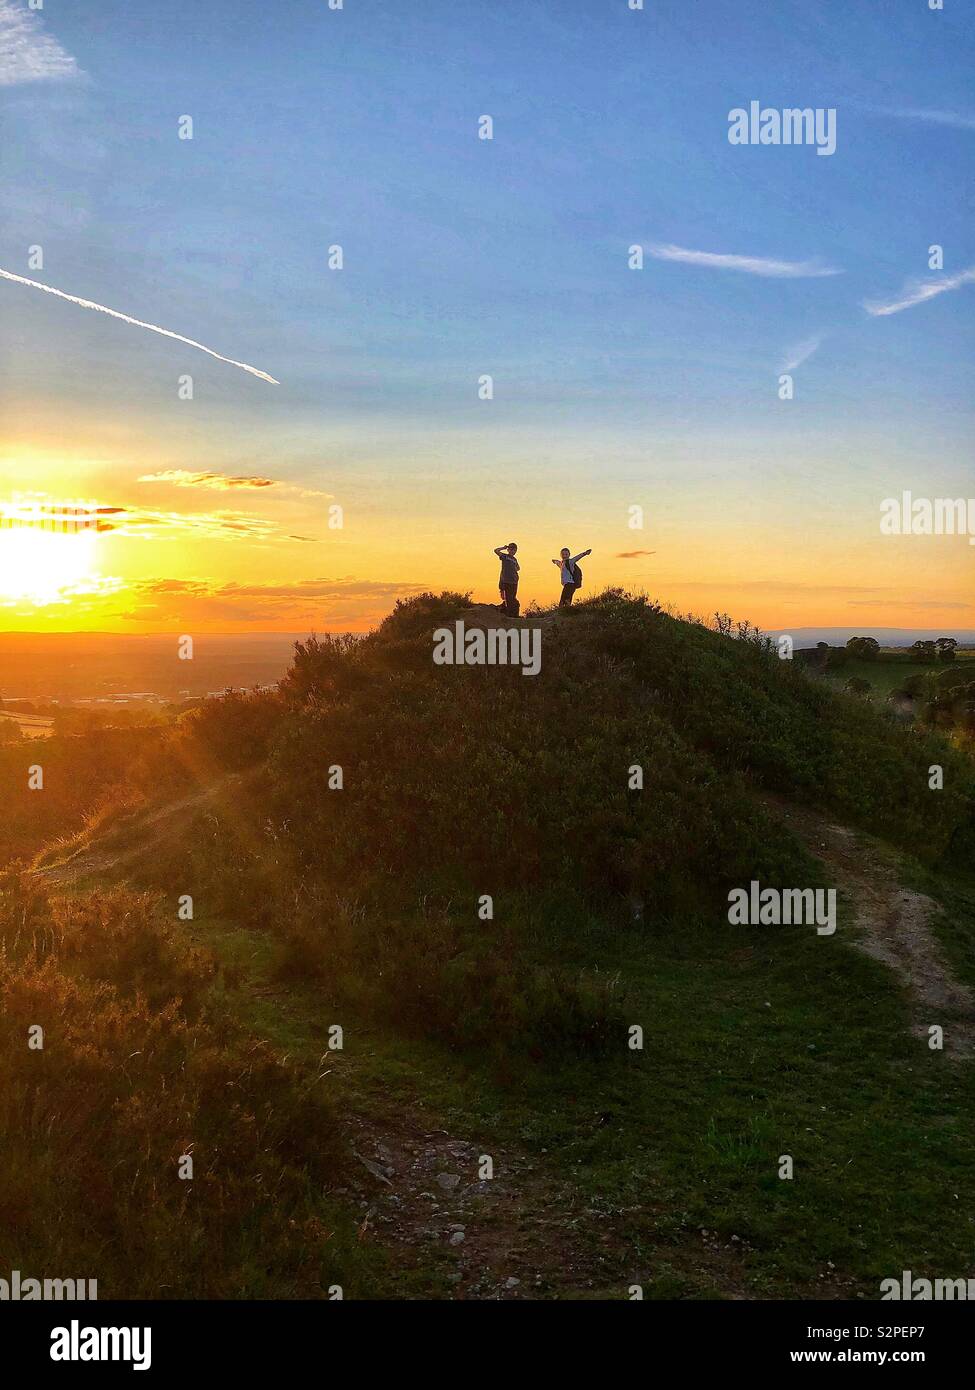 Children on top of a hill at sunset Stock Photo